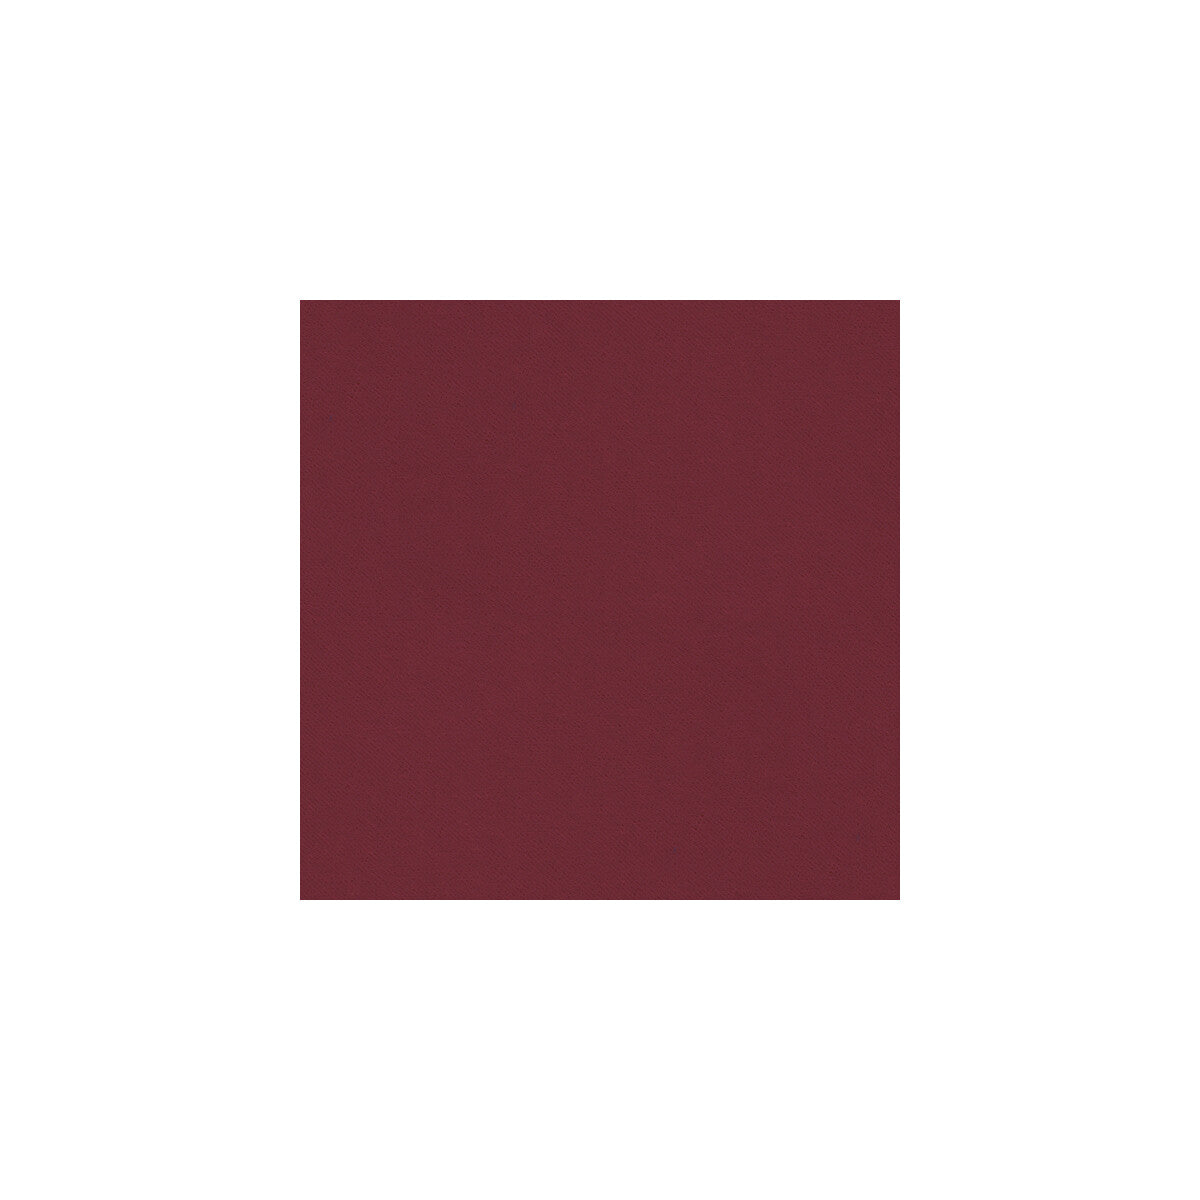 Delta fabric in beet color - pattern 32864.9.0 - by Kravet Contract in the Gis collection